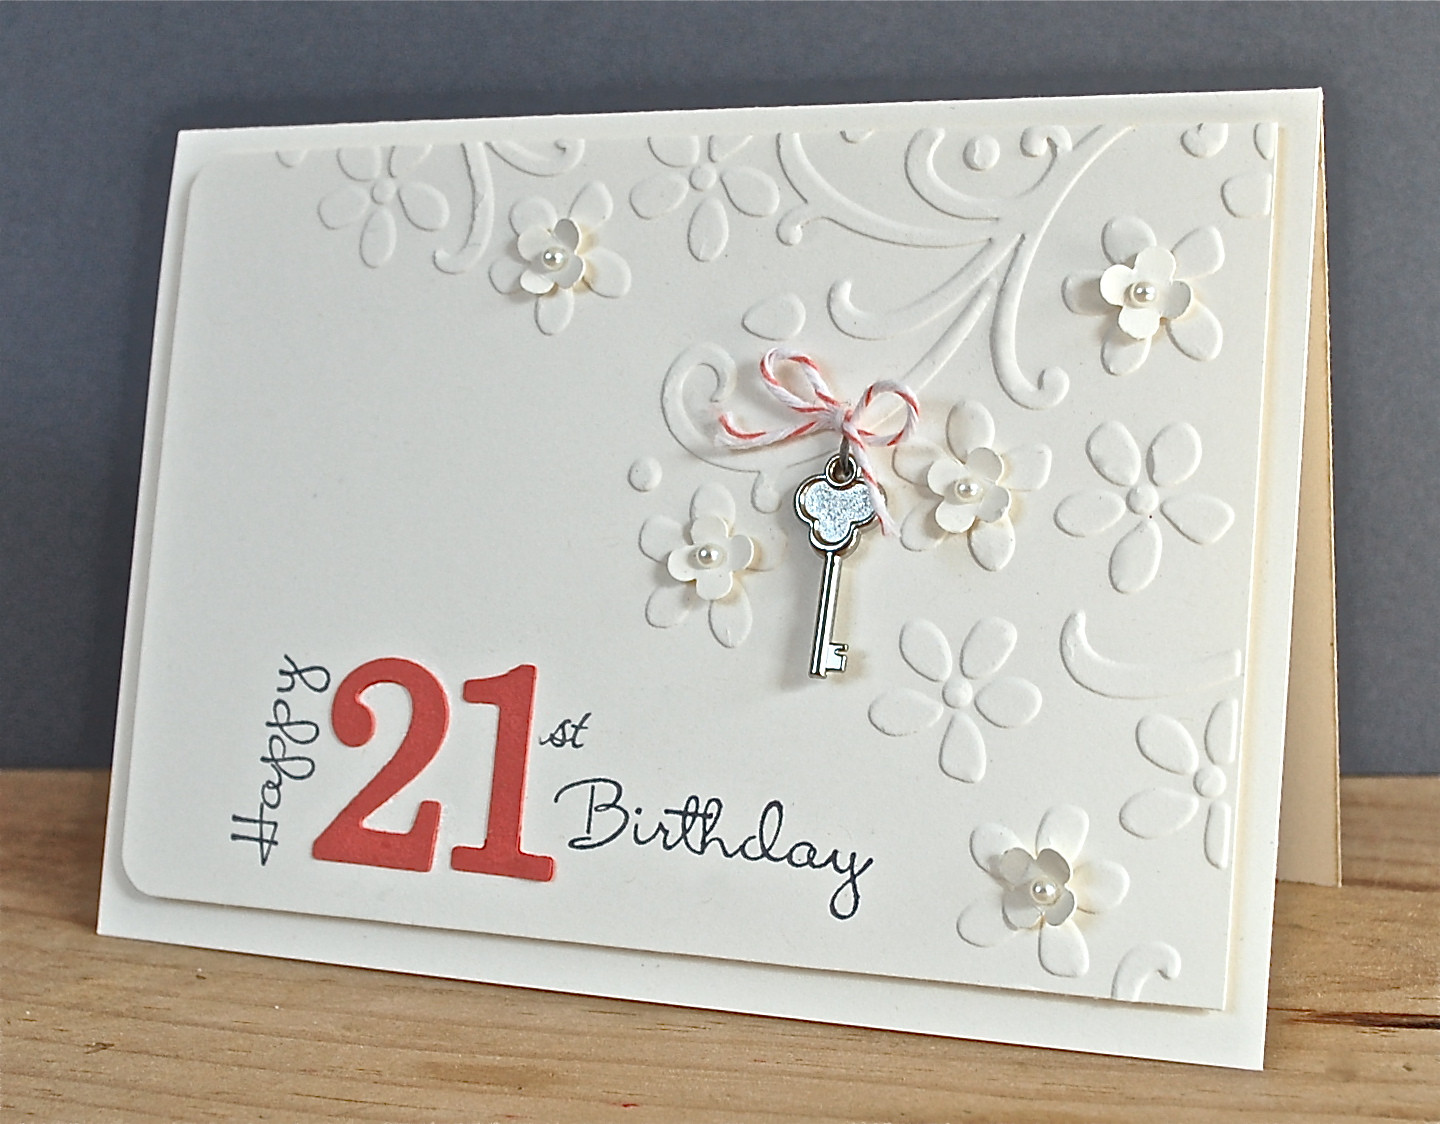 21st Birthday Card Ideas
 Crafting ideas and supplies from Vicky at Crafting Clare s